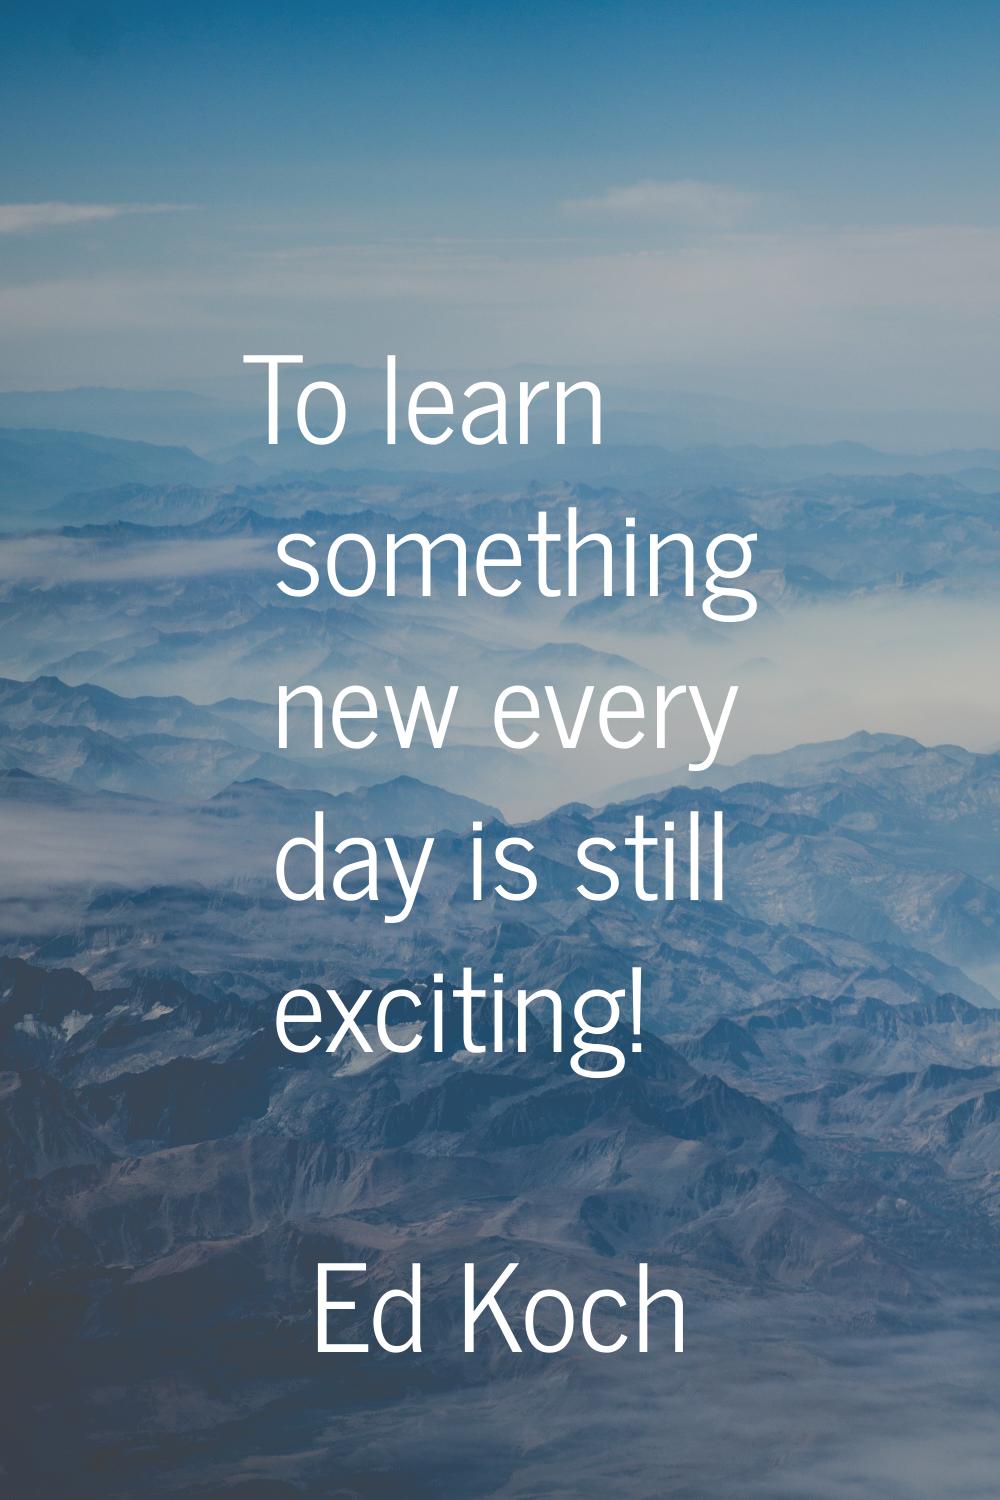 To learn something new every day is still exciting!